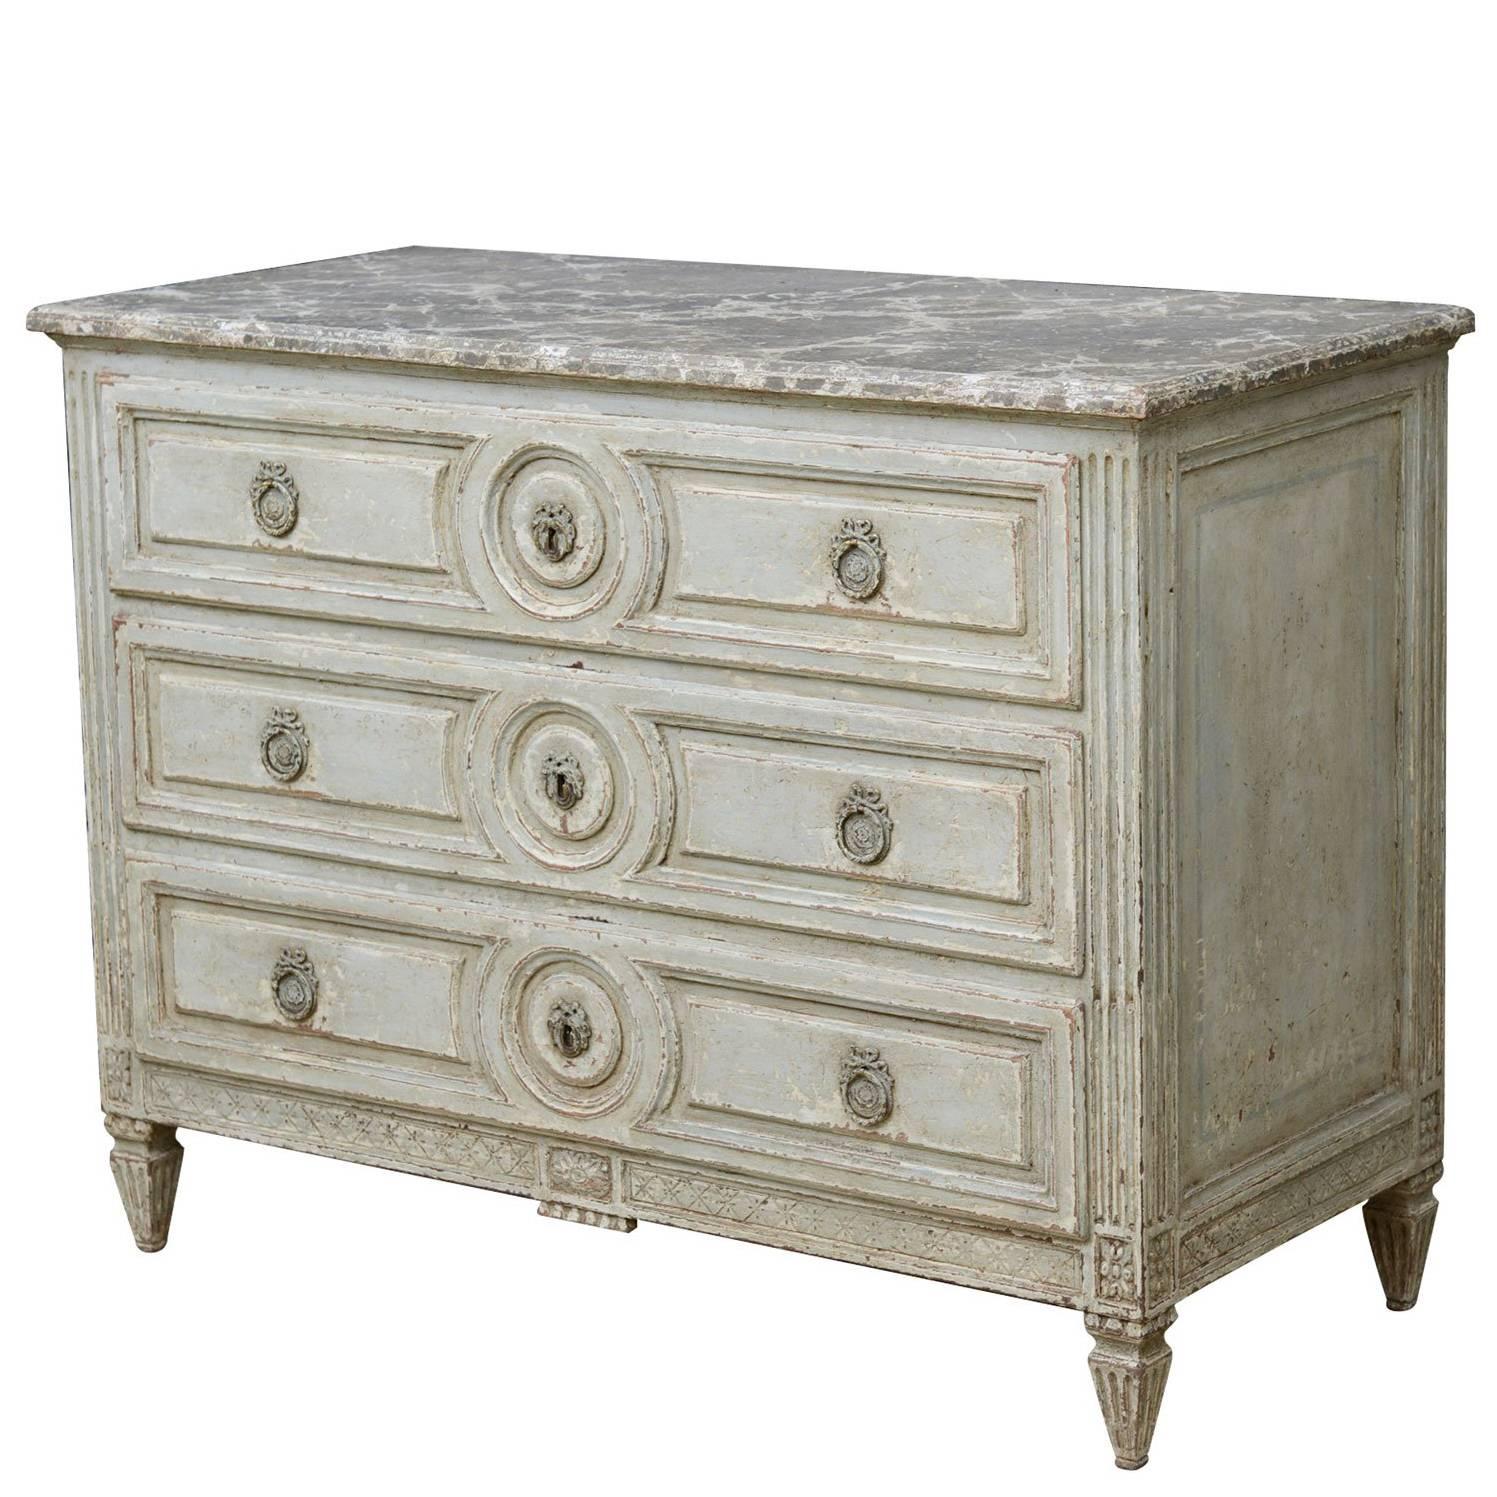 French Louis XVI Style Painted Chest of Drawers with Faux Marble Top For Sale